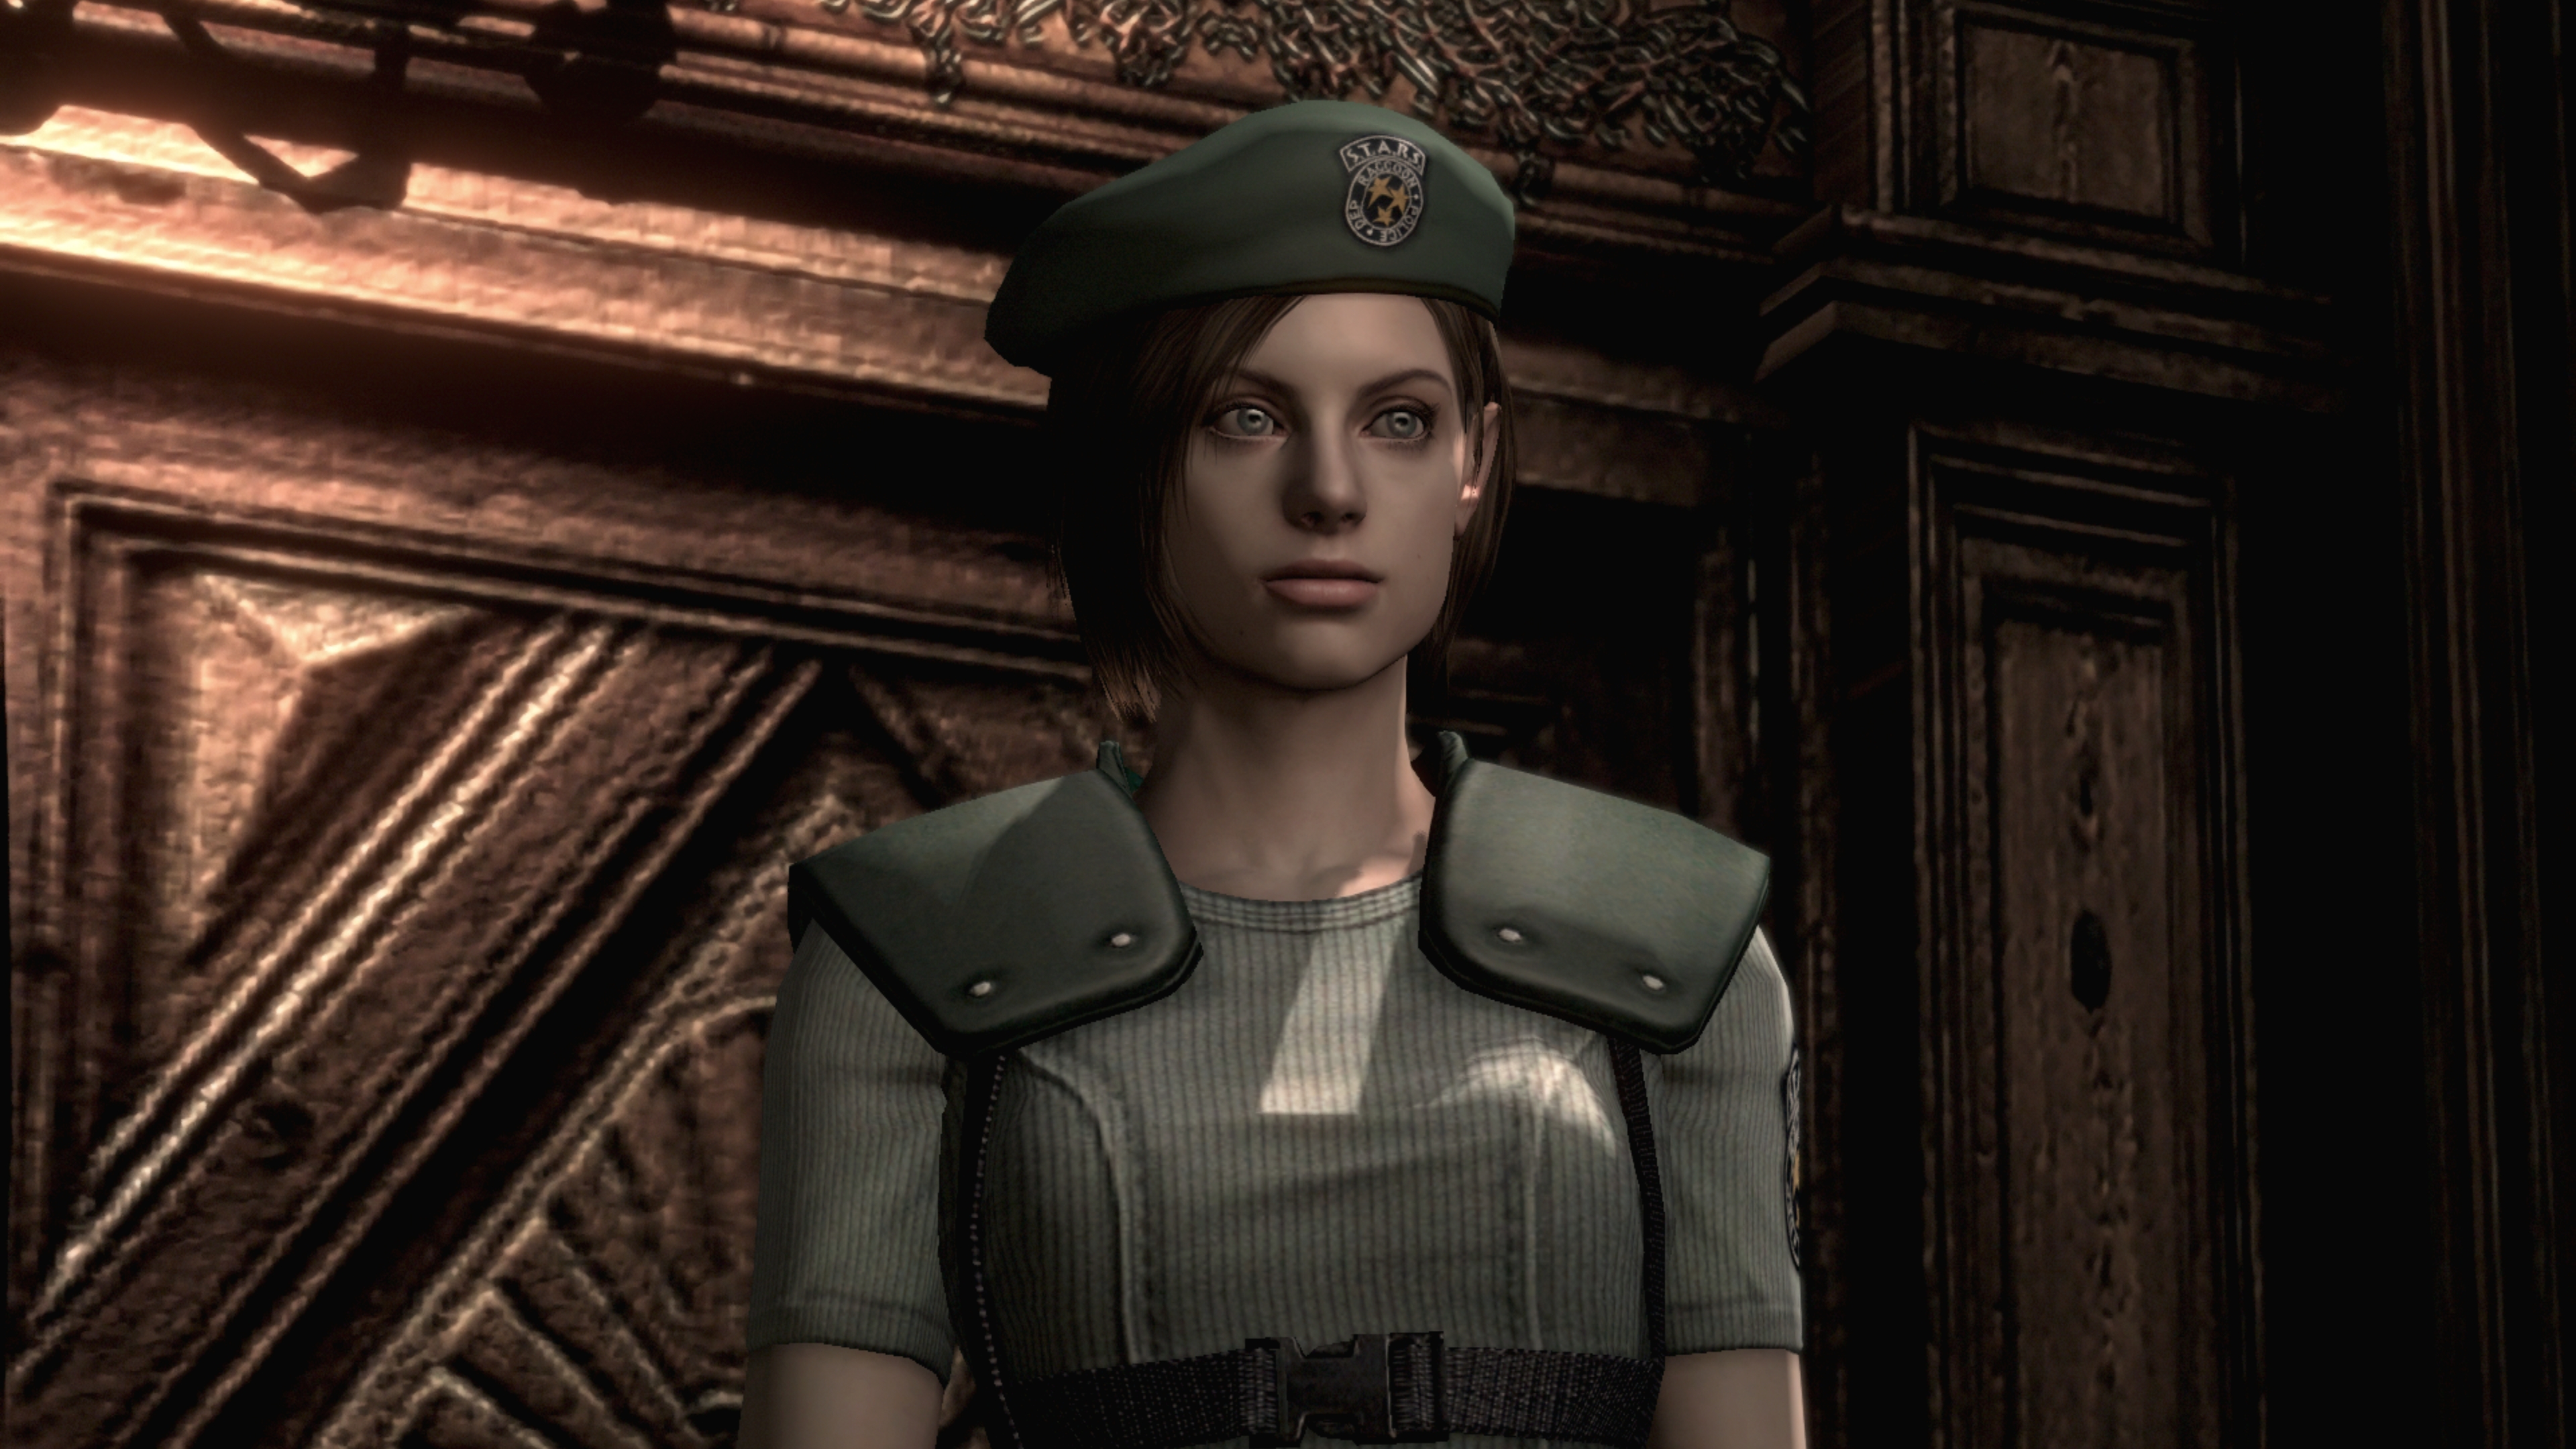  Resident  Evil  Backgrounds  Pictures Images